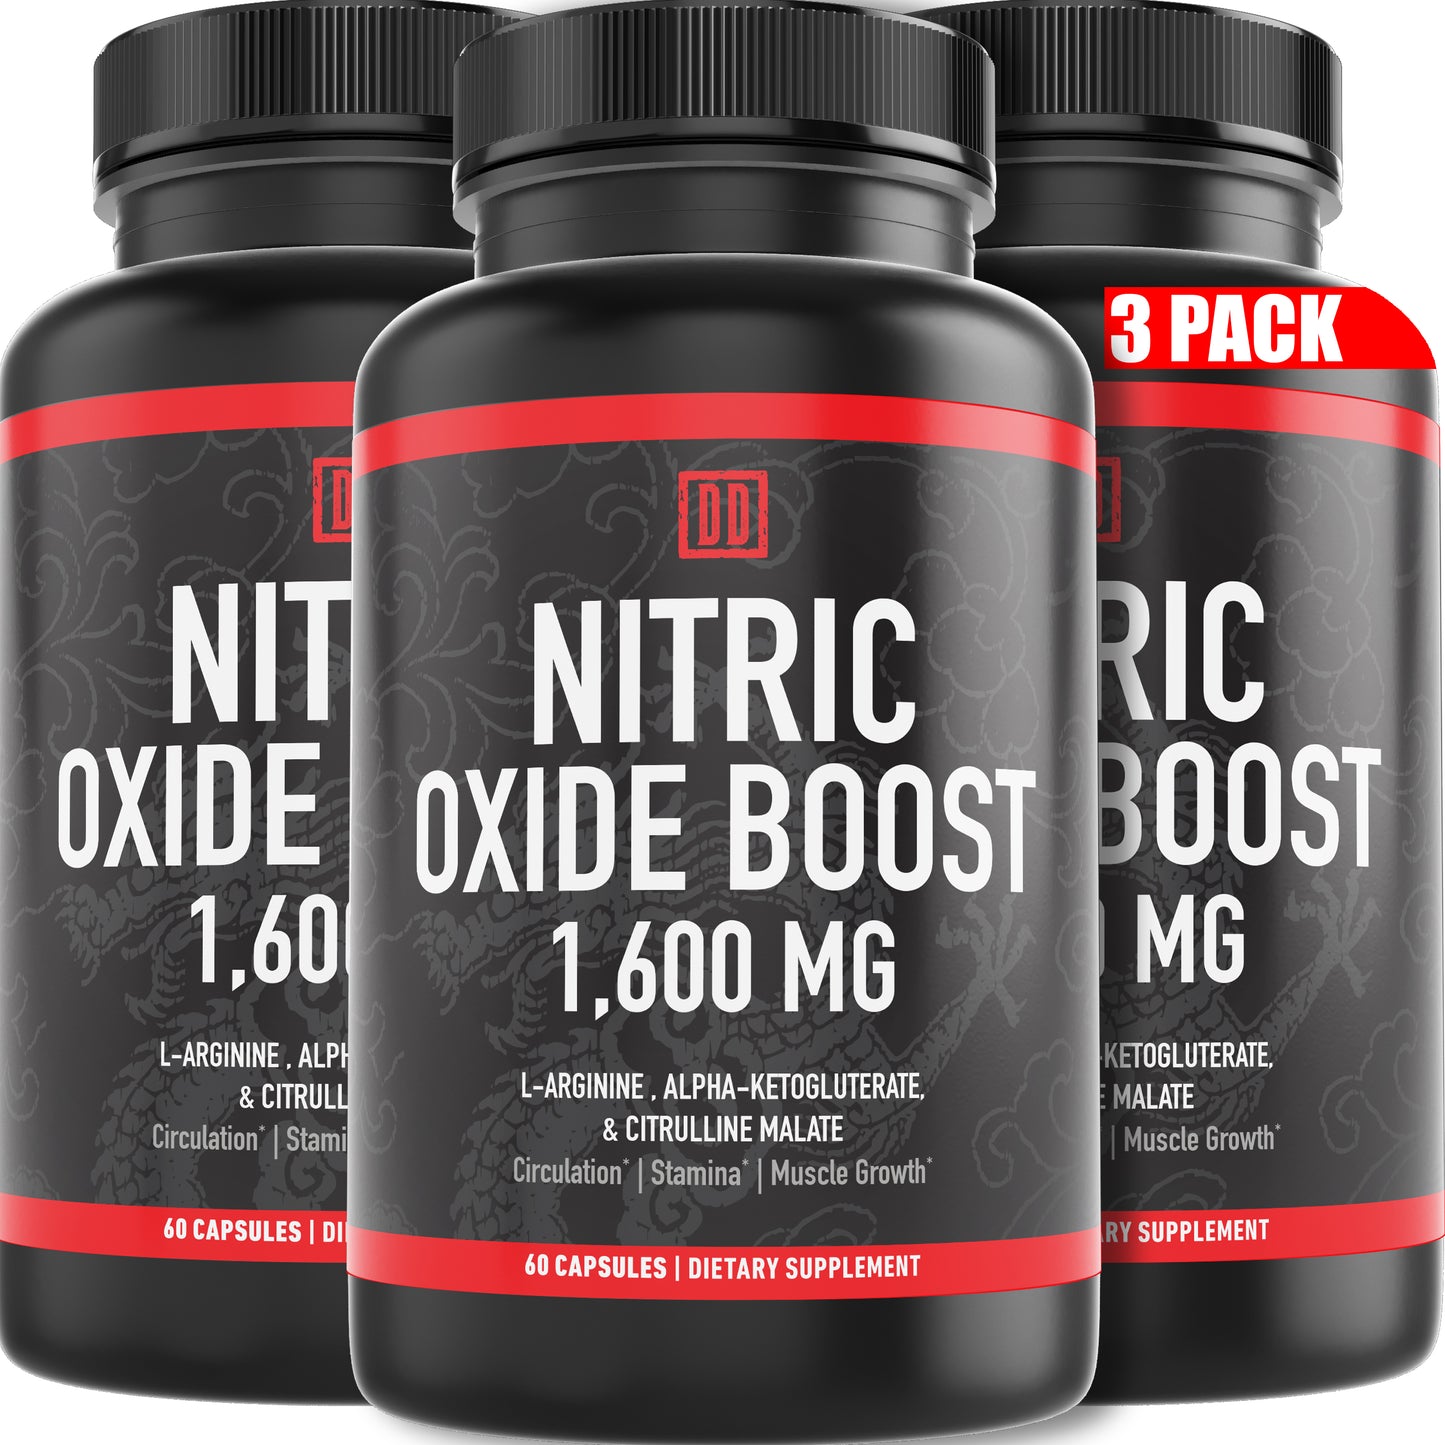 Nitric Oxide Booster 1600mg (3 Pack)